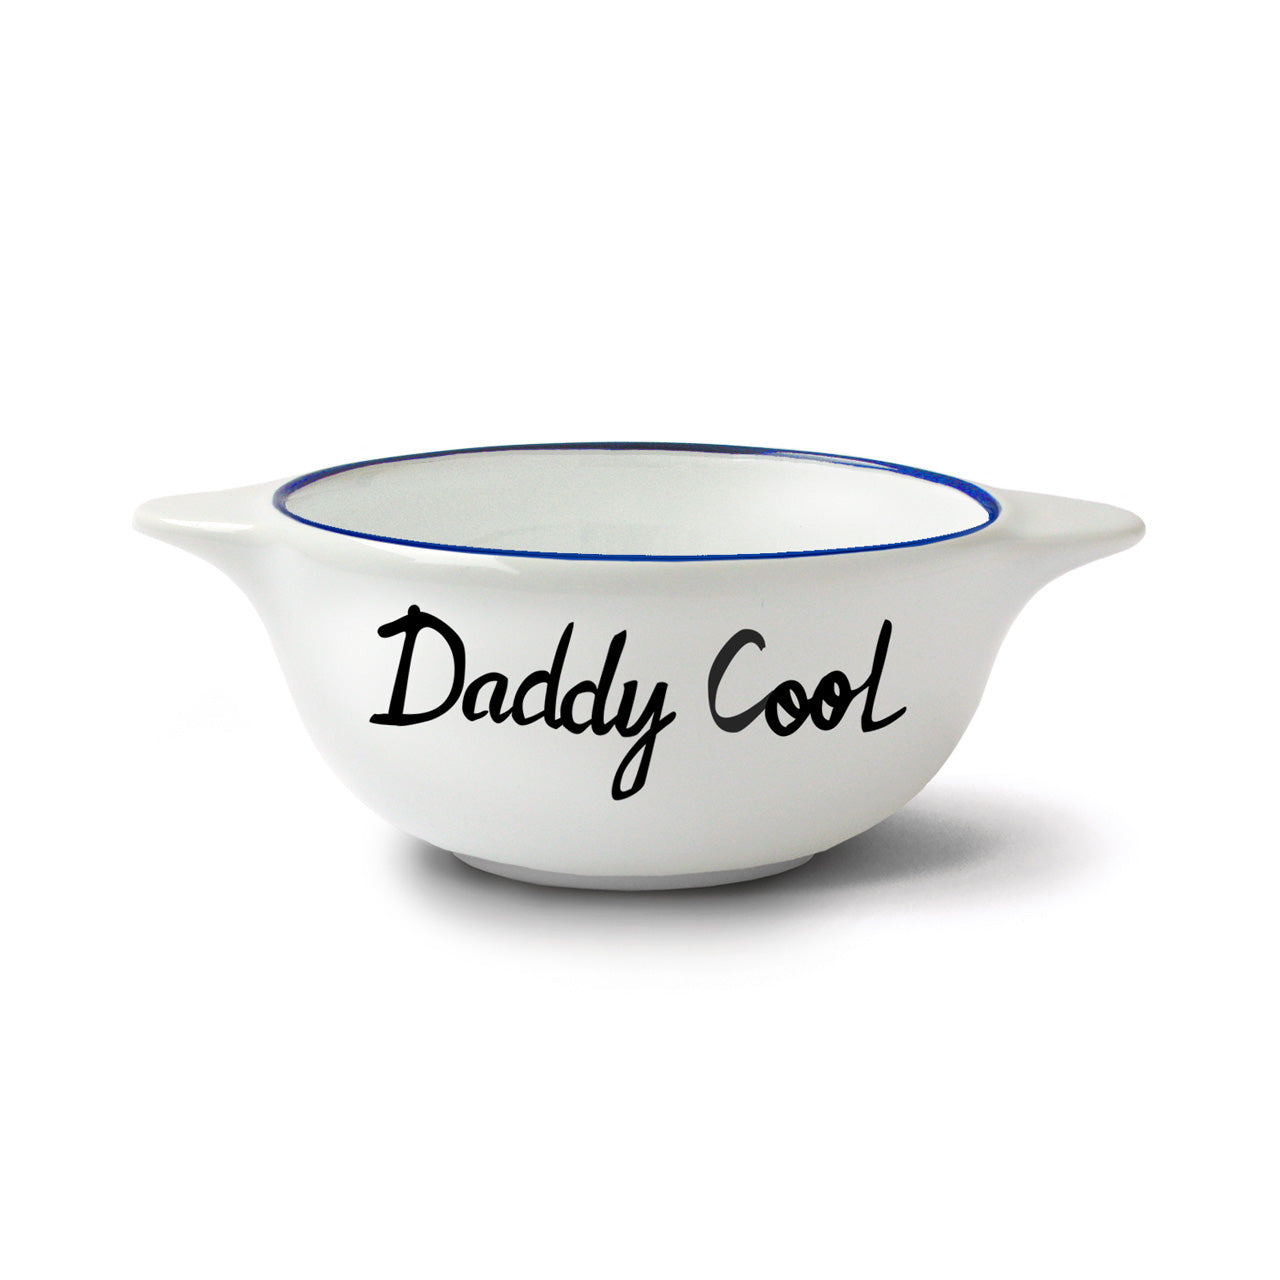 Daddy Cool - Bol Collection La Famille s'éclate